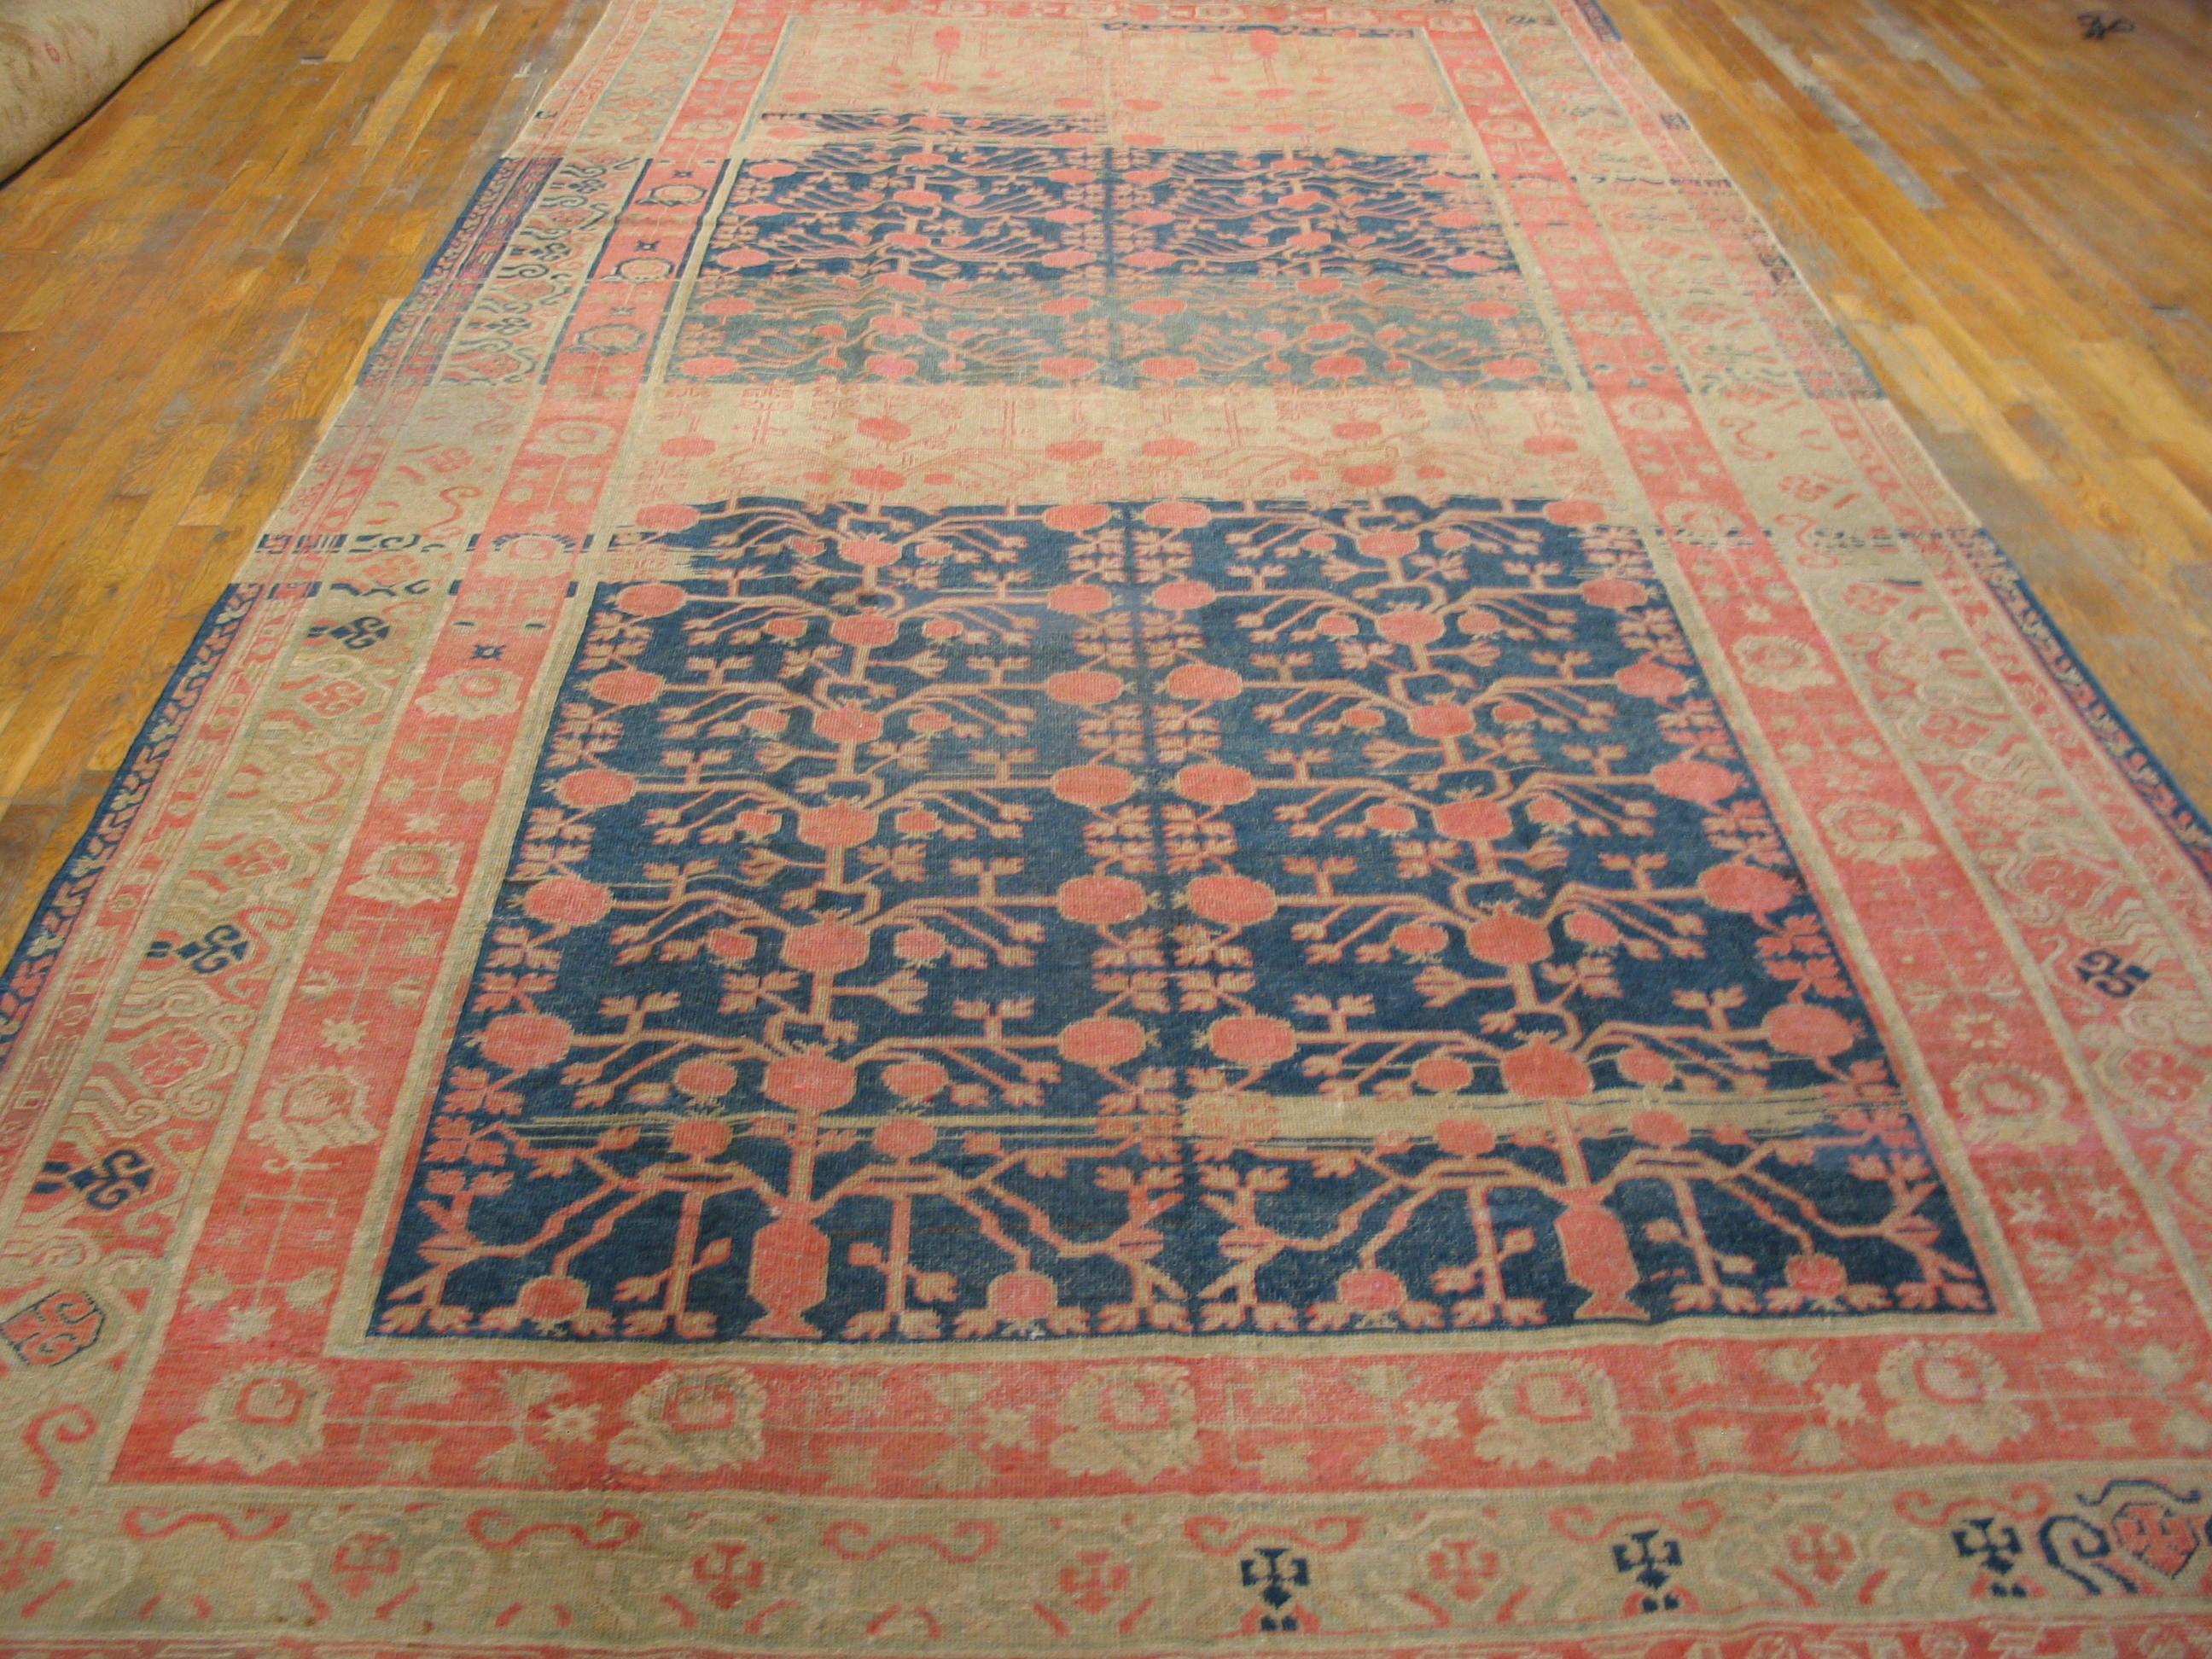 Hand-Knotted Early 20th Century Central Asian Khotan Carpet ( 7'4